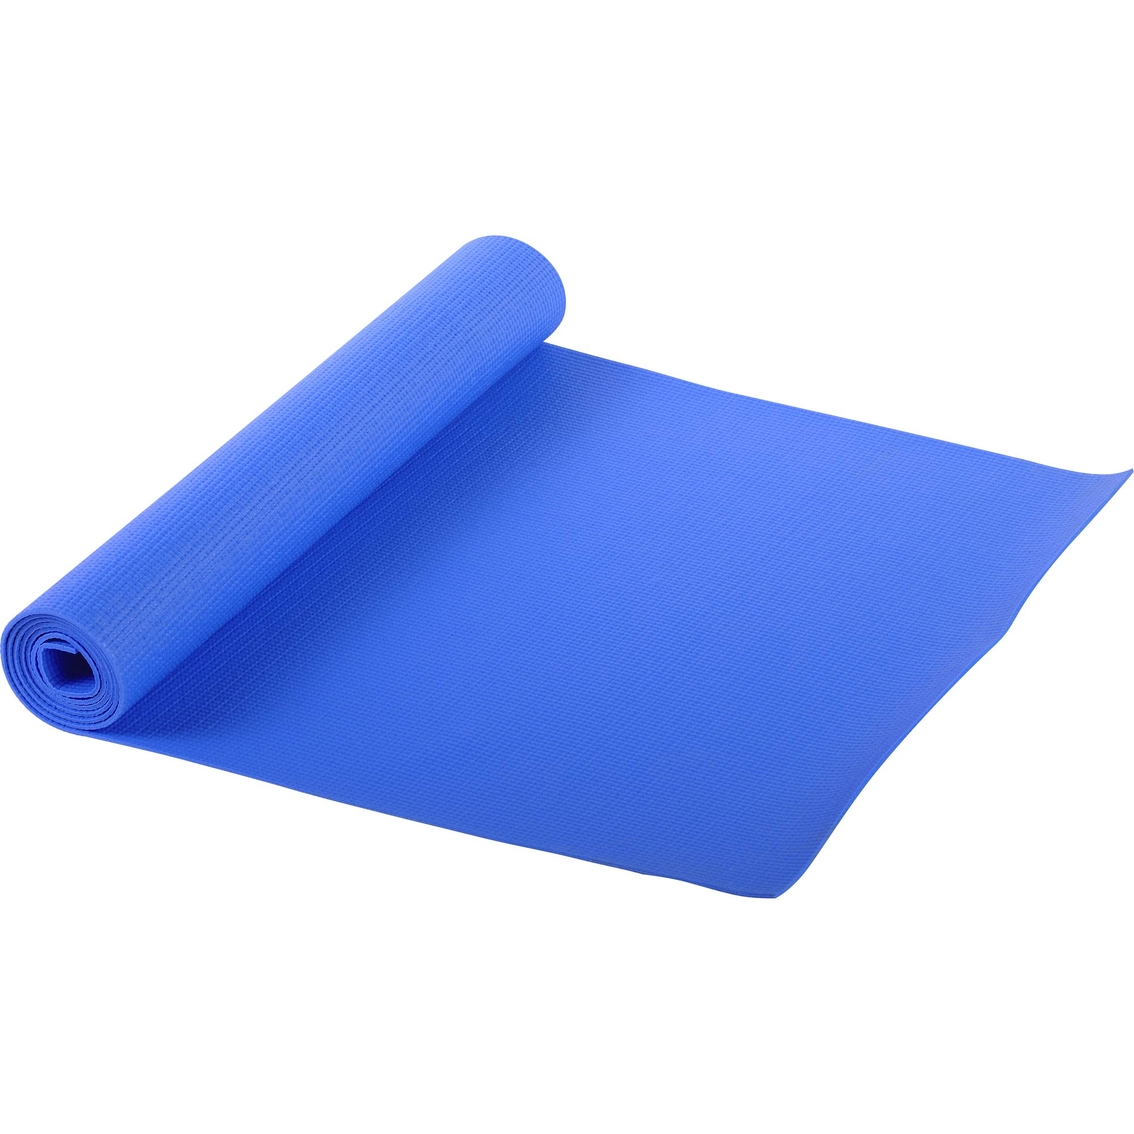 Sunny Health and Fitness Yoga Mat, Blue